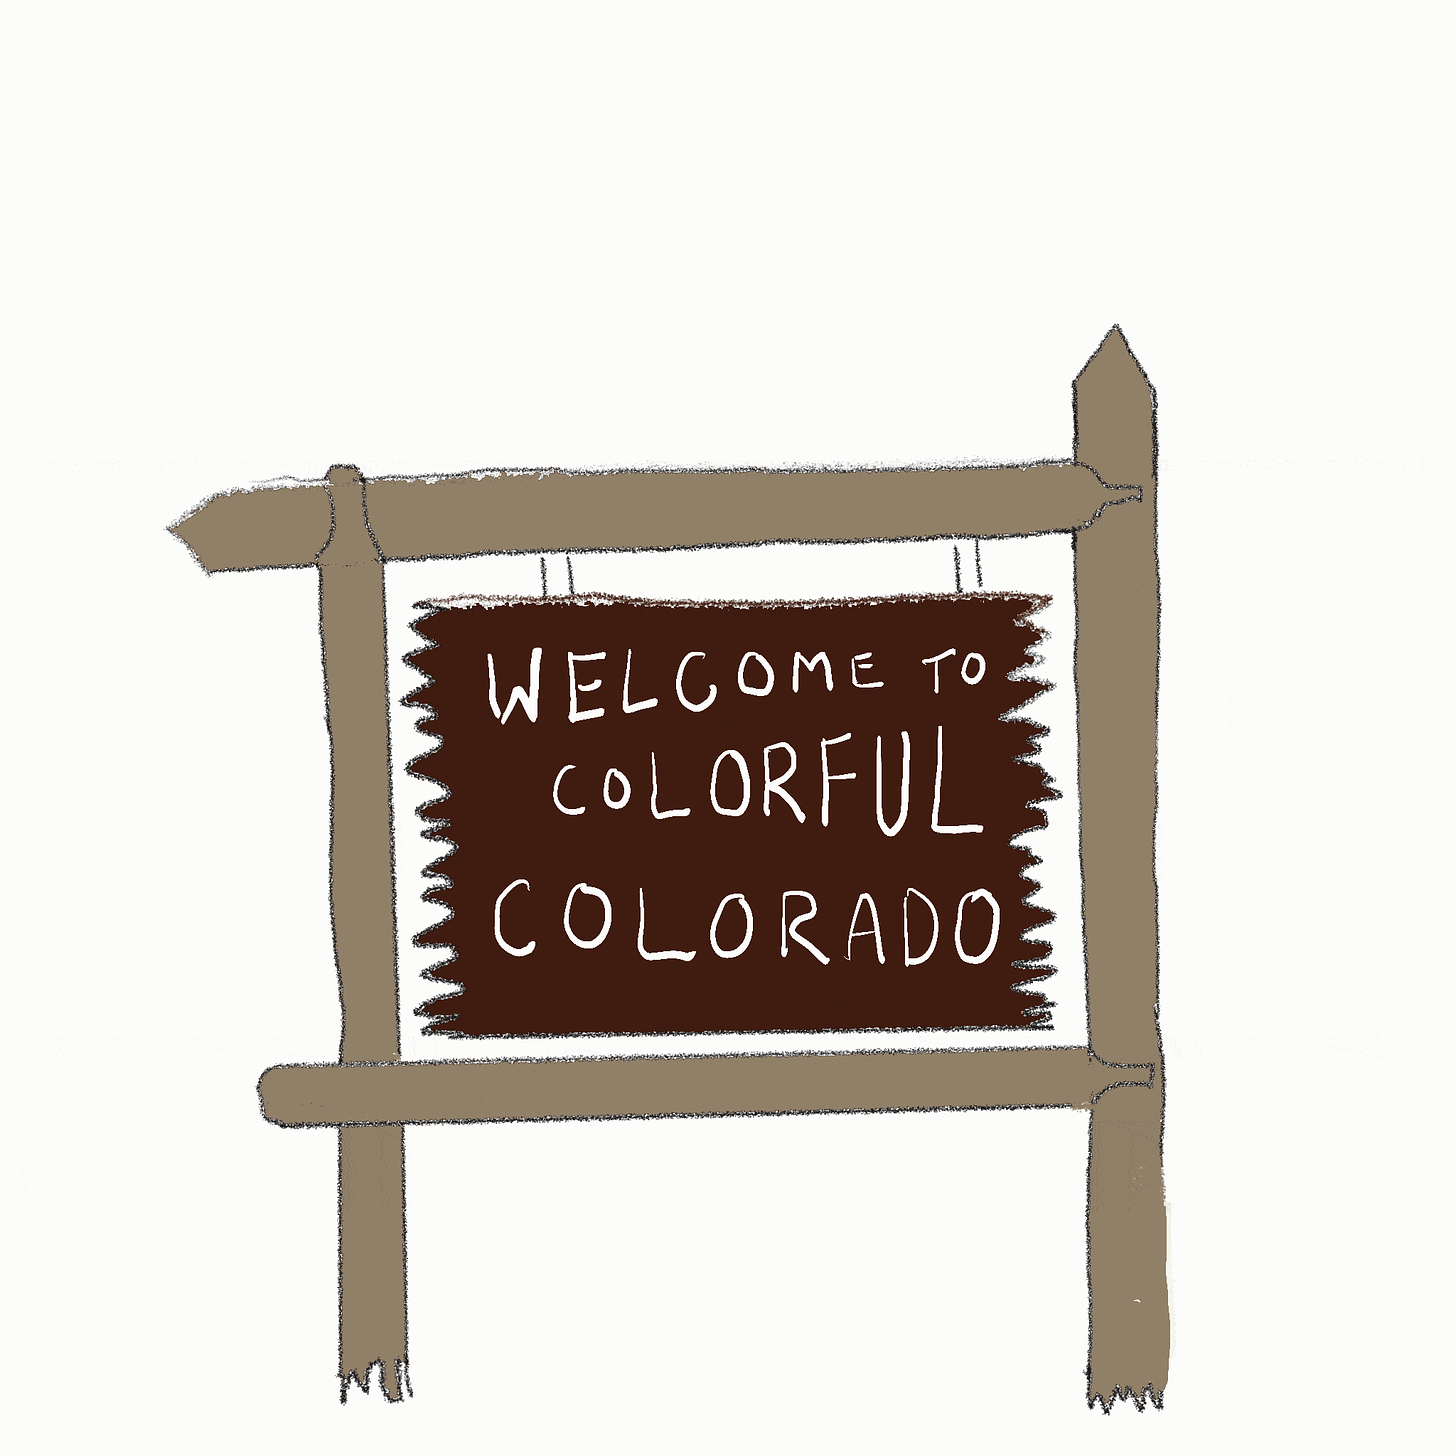 An animation shows a sign reading "Welcome to Colorful Colorado" with a gray wolf then coming into the picture.